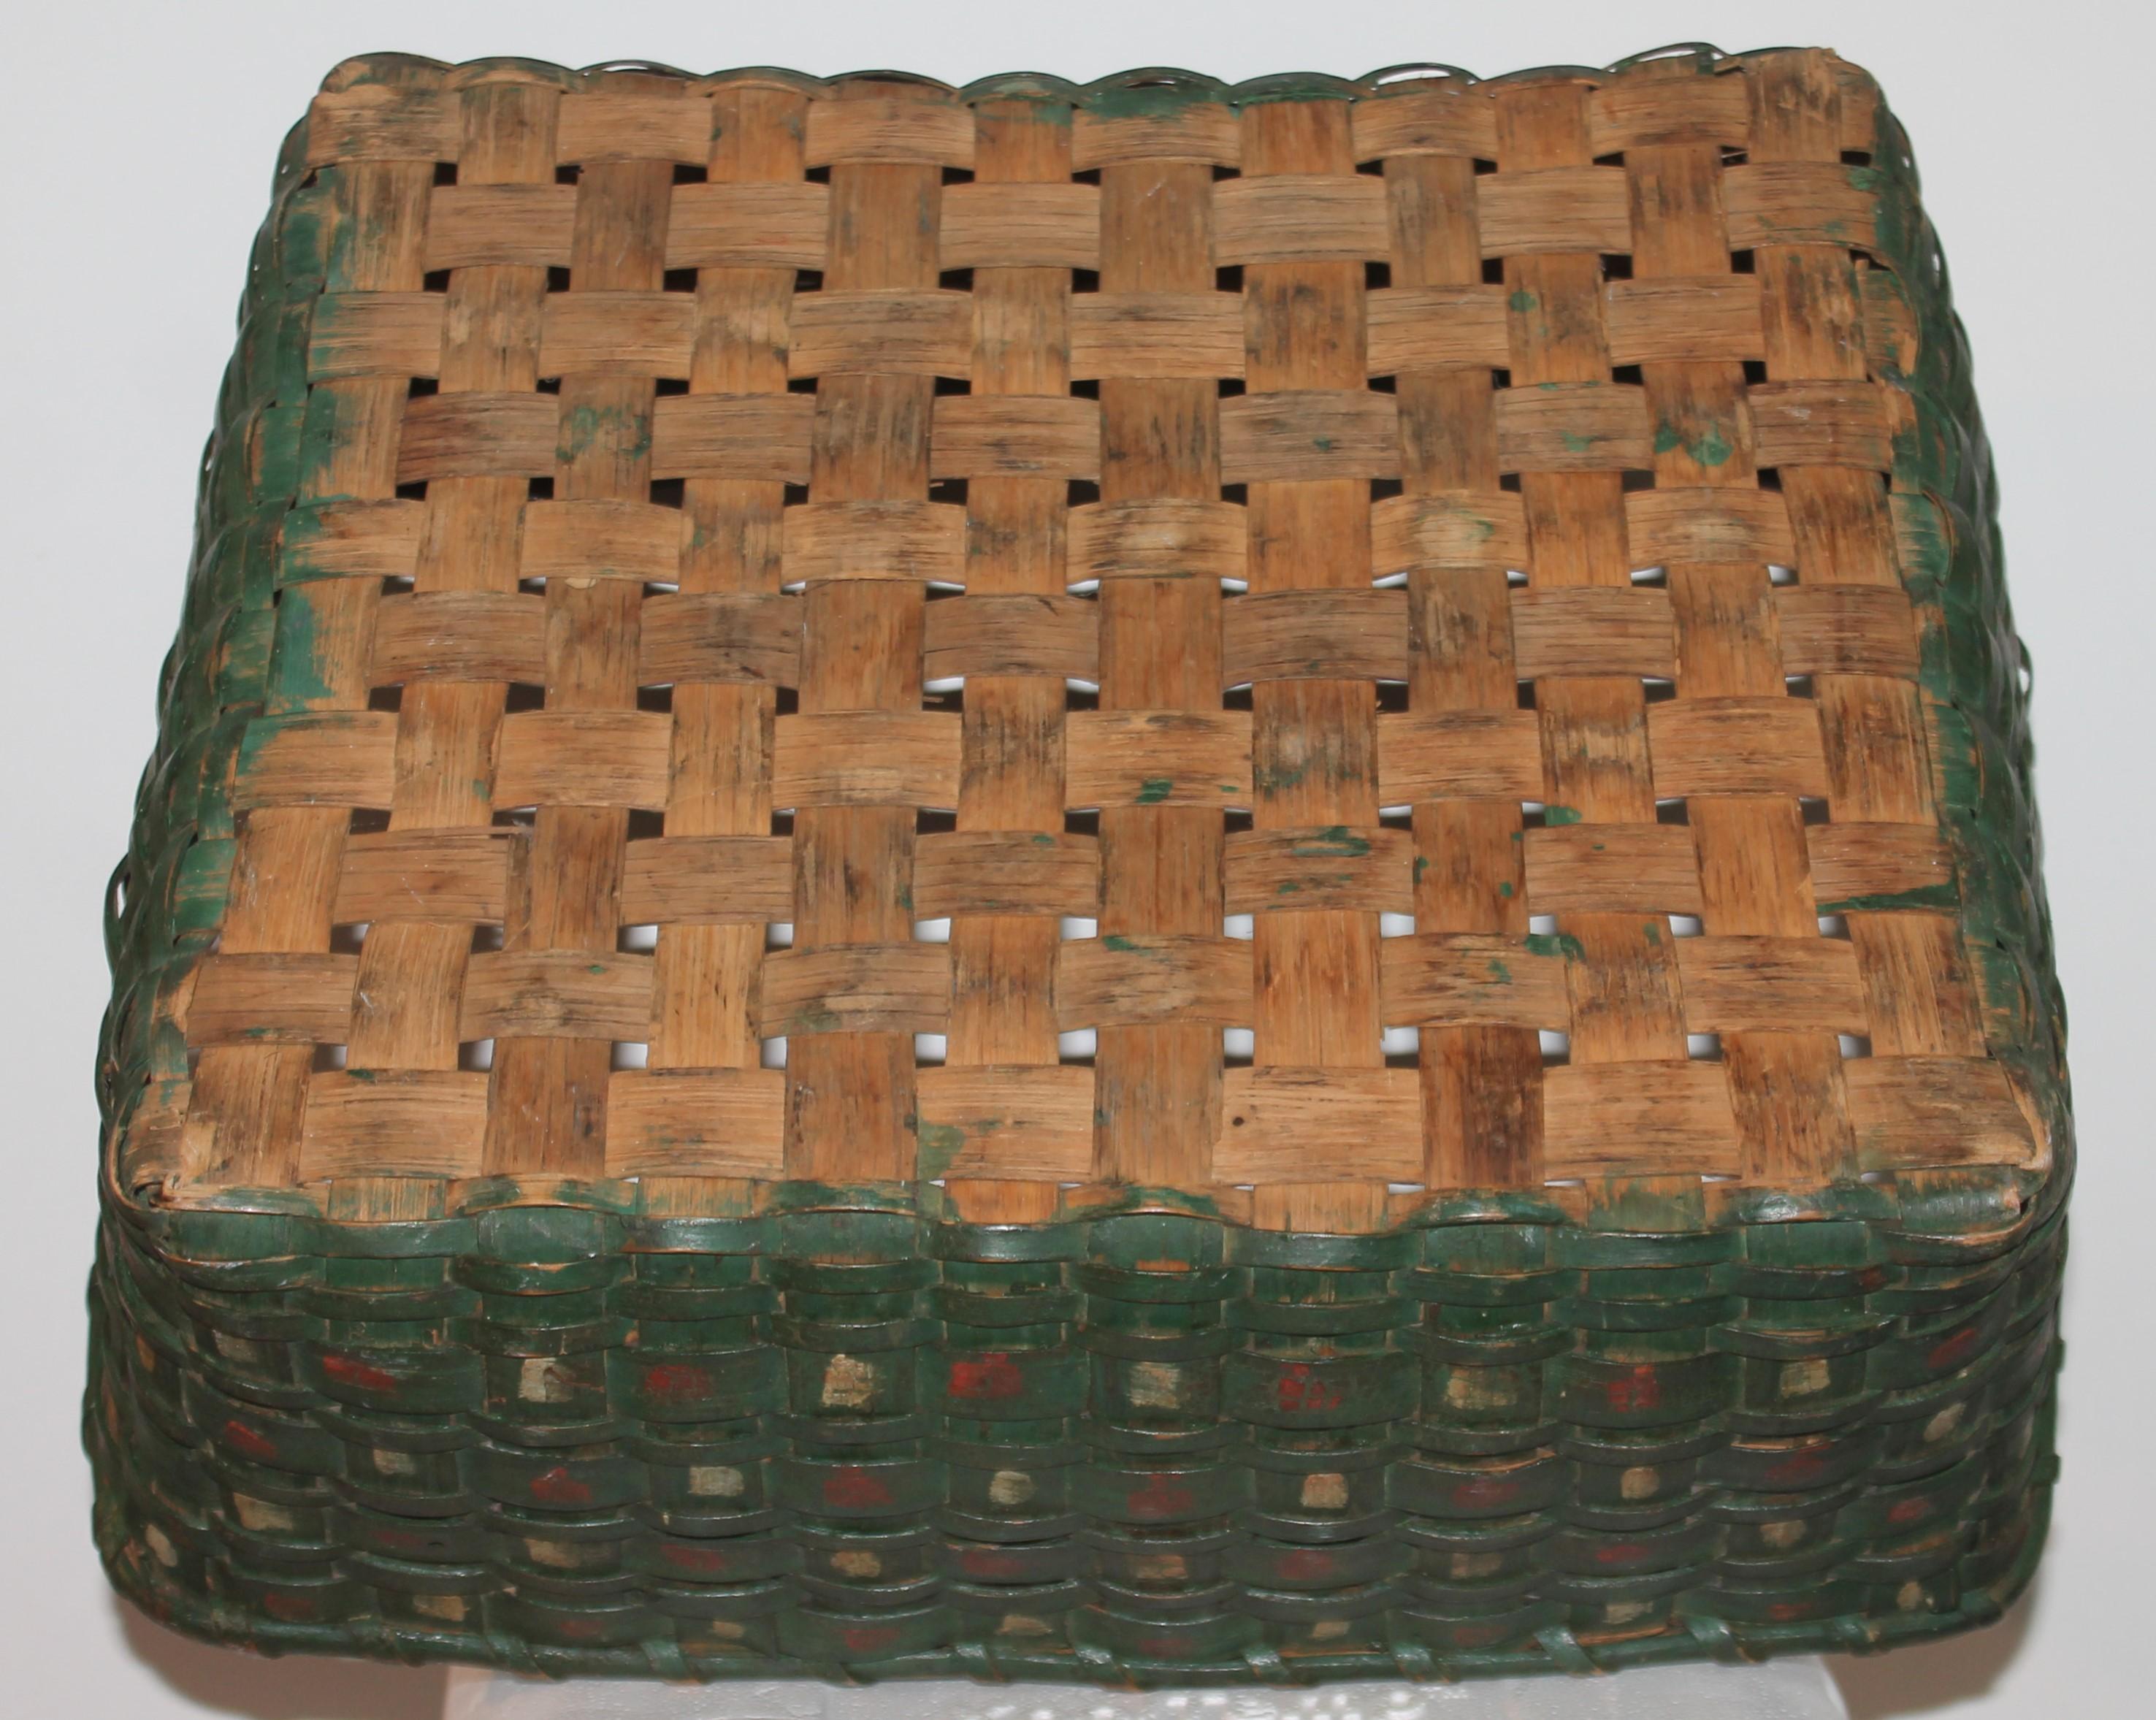 Hand-Woven 19thc Paint Decorated Double Handled Basket